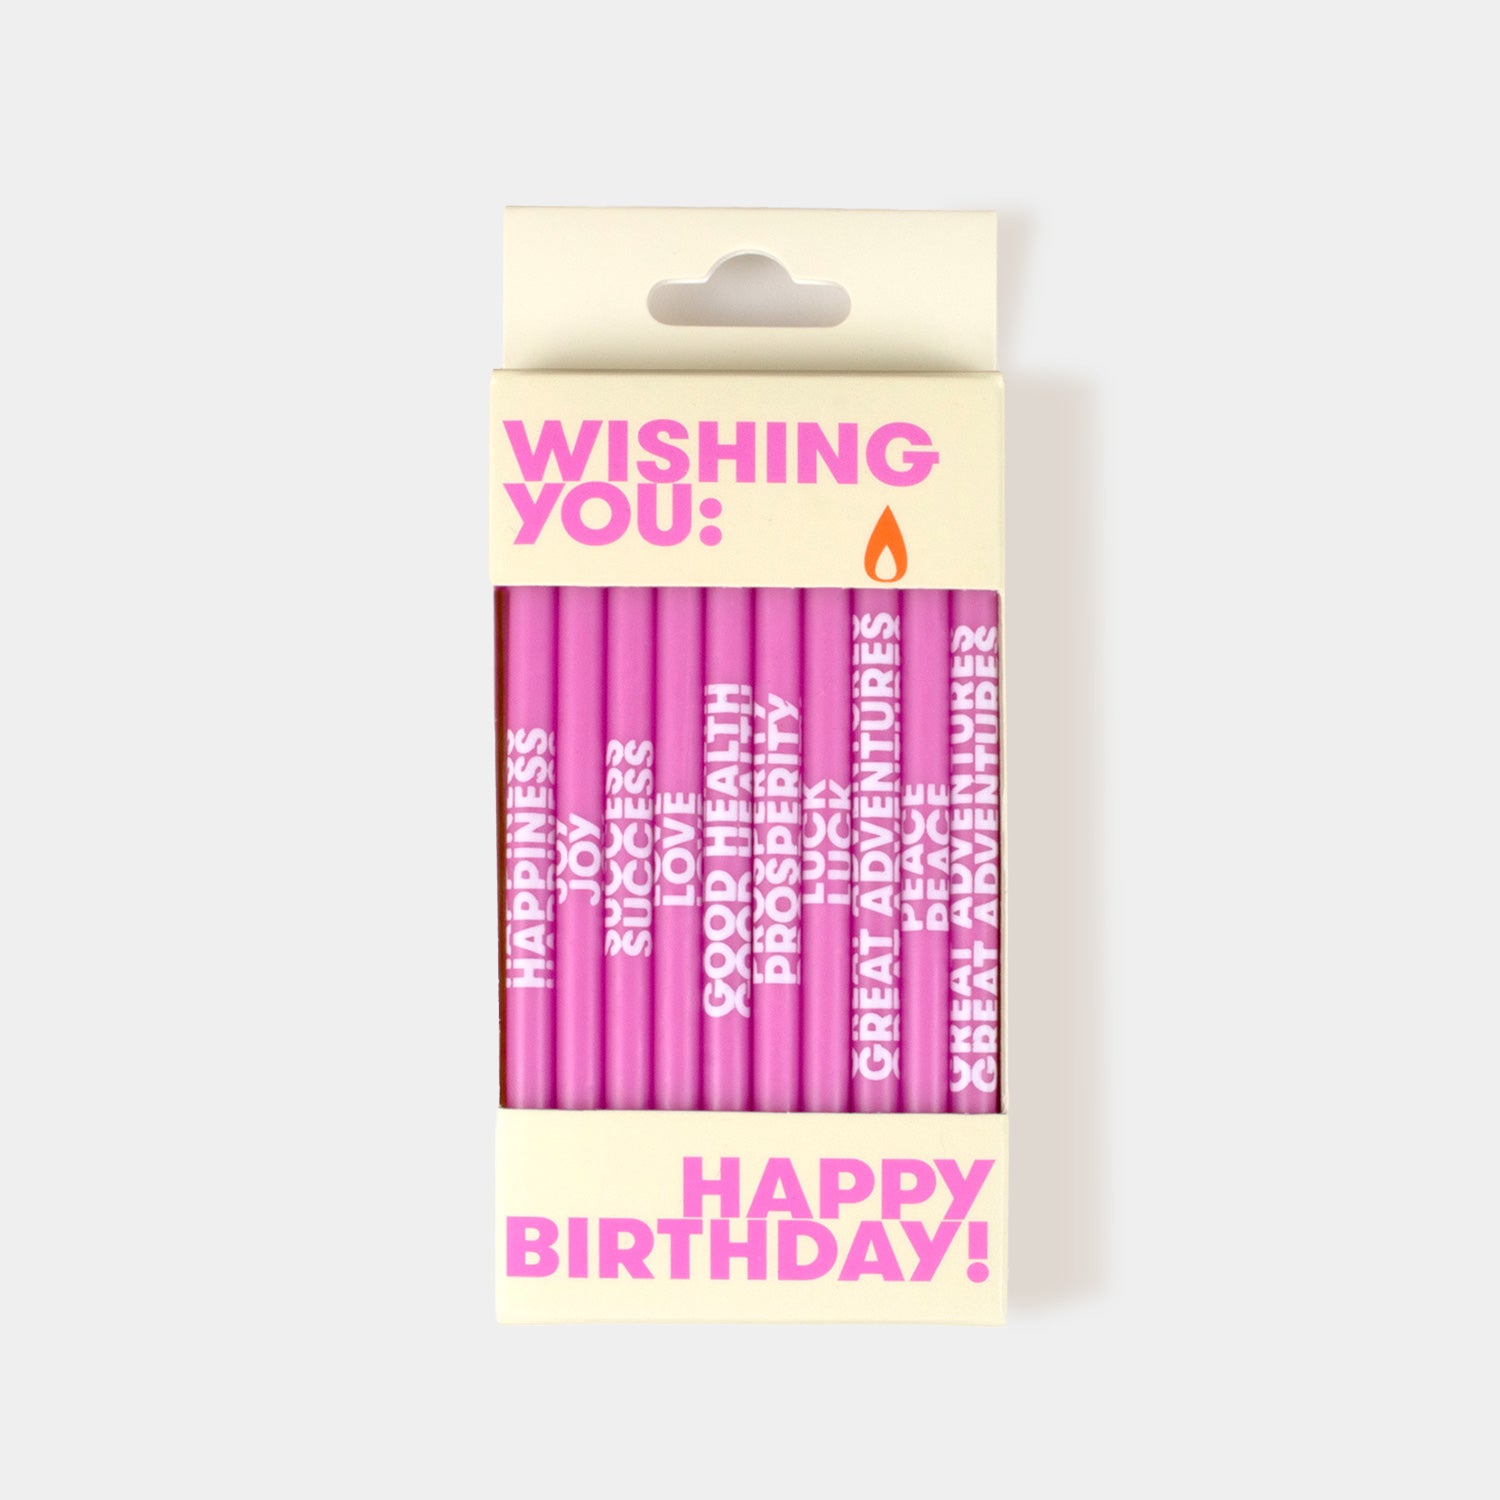 Wishing You: Birthday Candles - Pink (10 pack)